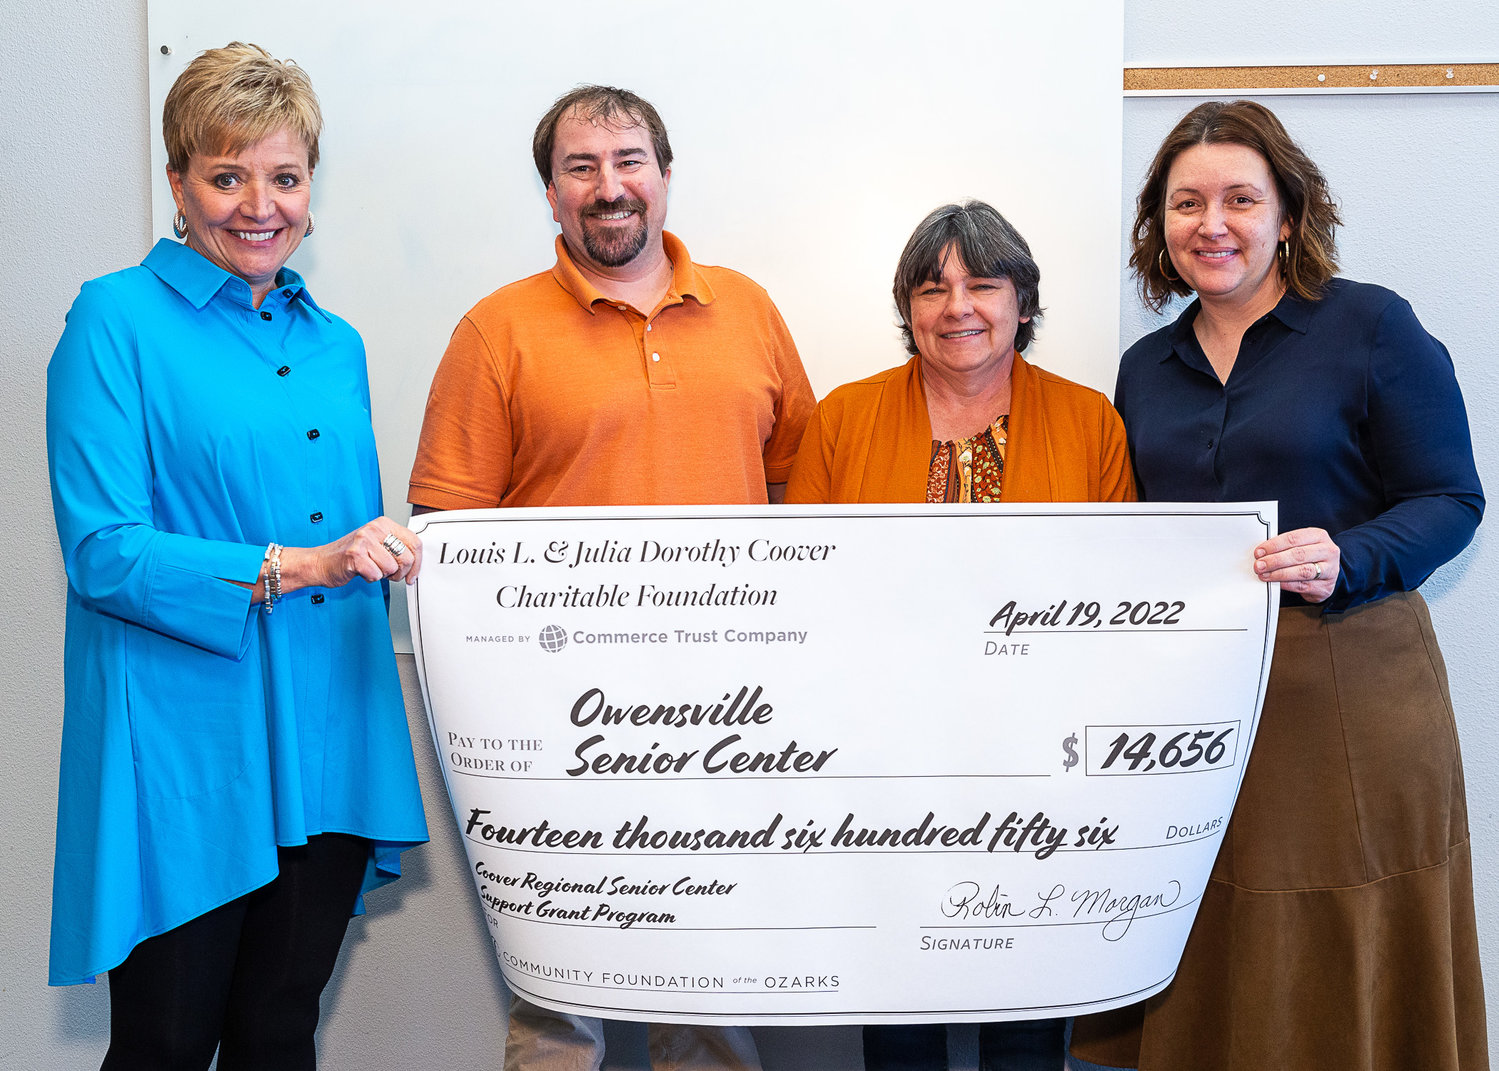 Owensville Senior Center was the April 19 recipient of a $14,656 grant from the Louis L. and Julia Dorothy Coover Charitable Foundation. Pictured (from left) are Jill Reynolds, Commerce Trust Company, Kyle Lairmore and Sharon Nowack, representing the Owensville Senior Center, and Bridget Dierks, Community Foundation of the Ozarks.